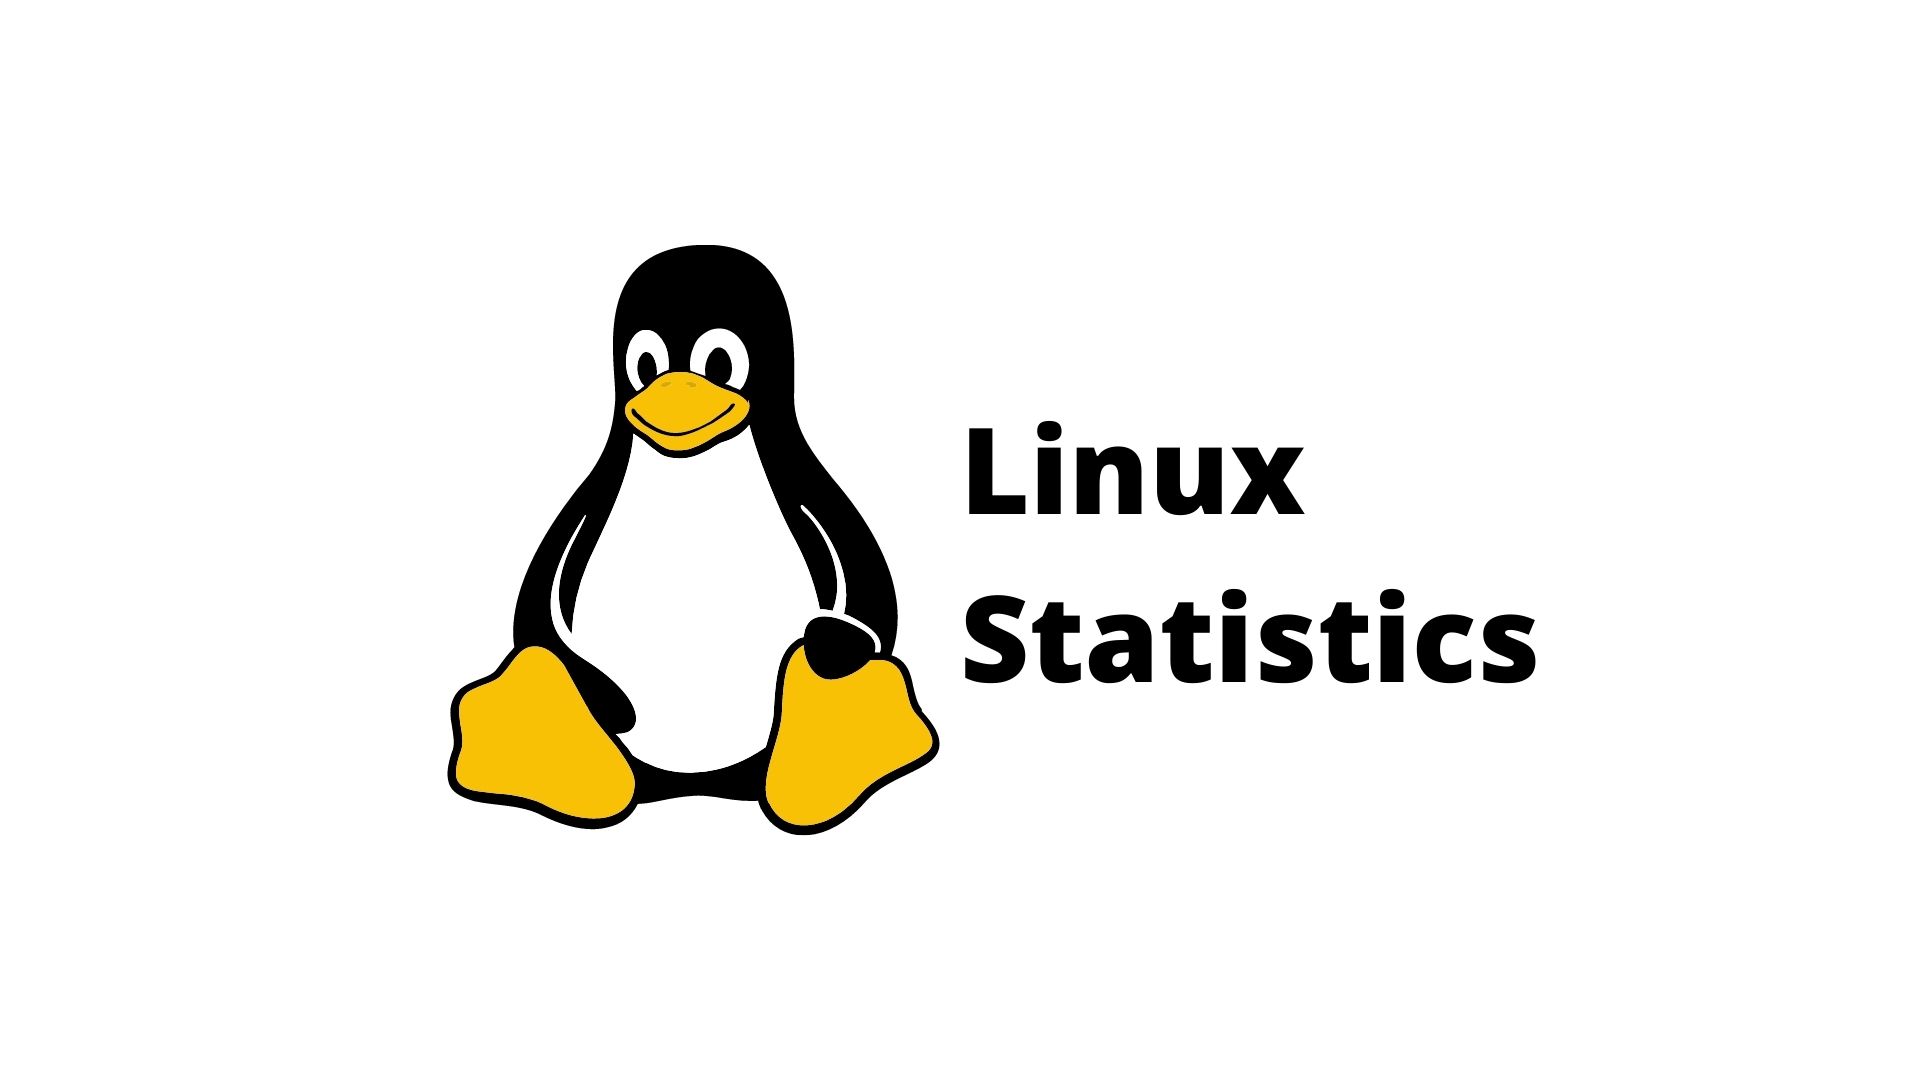 Linux Statistics 2022 – Market Share, Usage Data and Facts